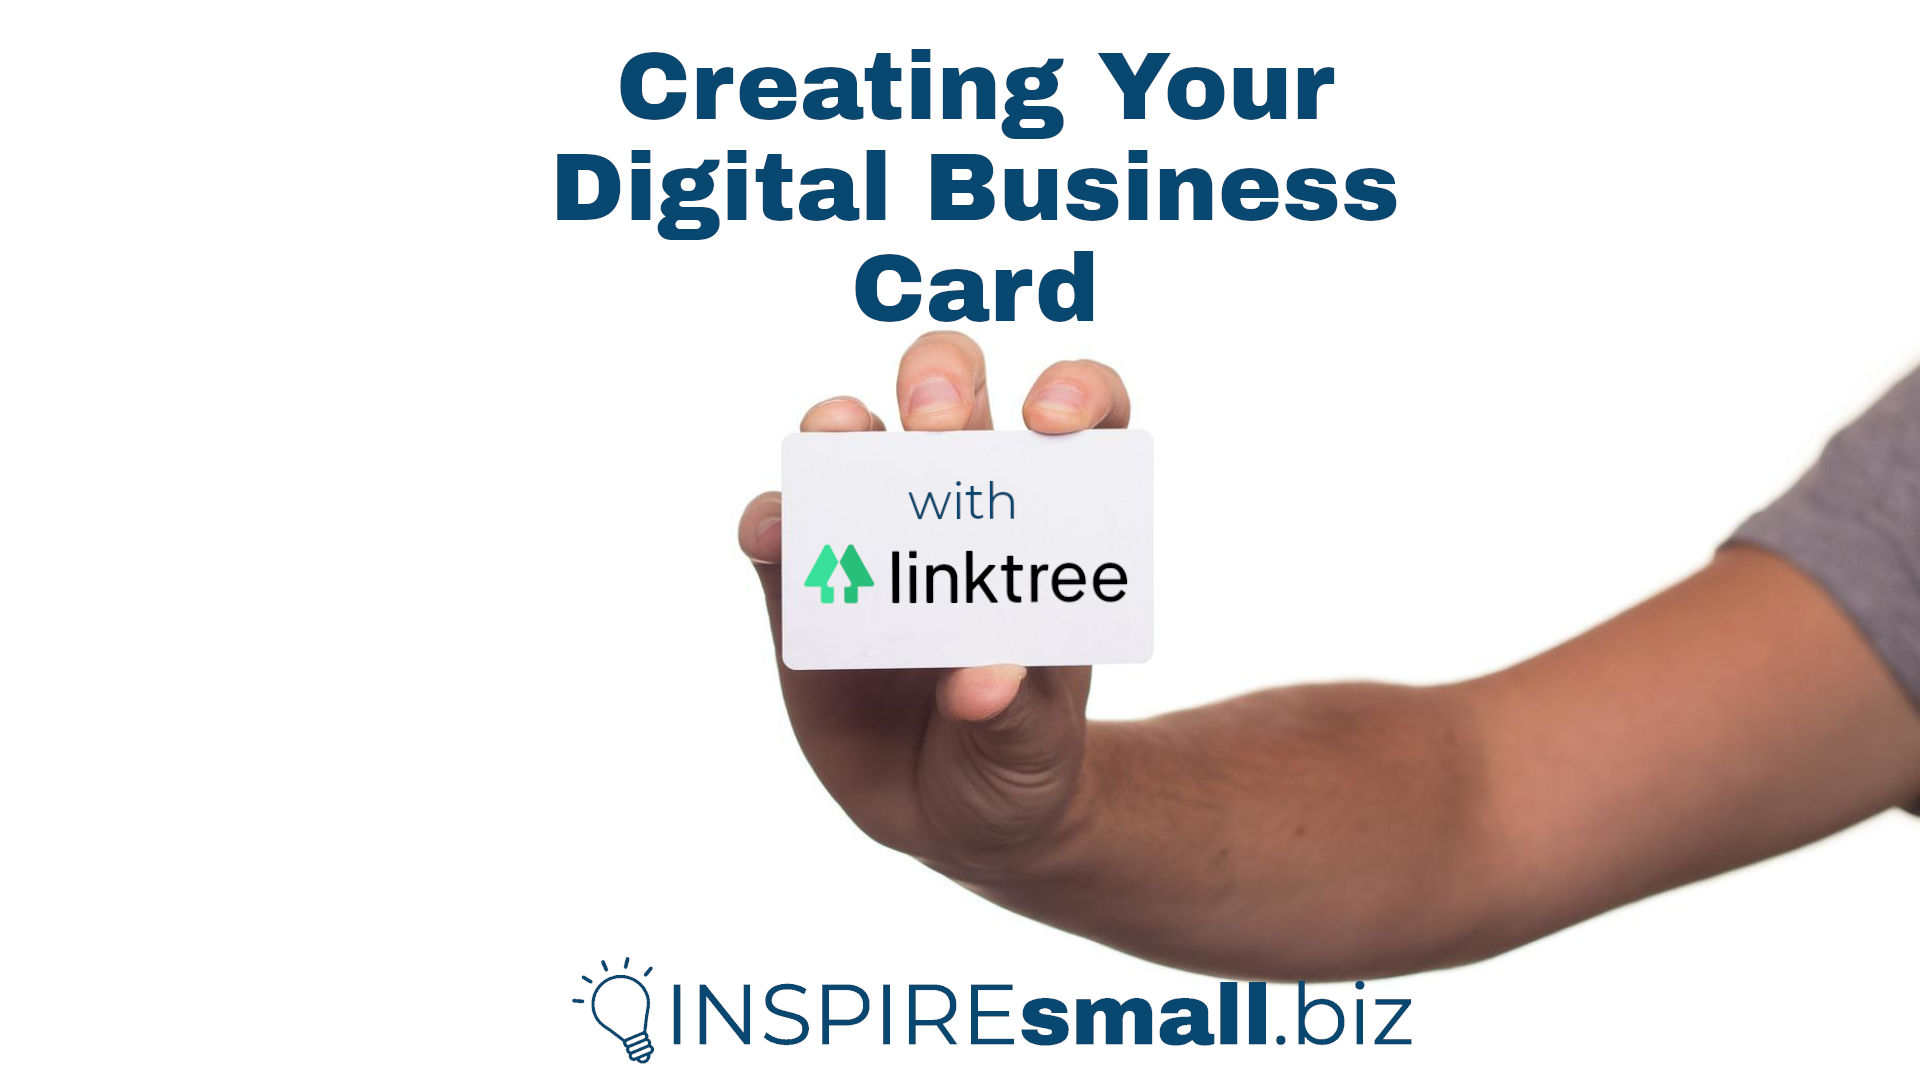 picture of somebody holding a business card with 'Creating Your Digital Business Card with Linktree' written on it